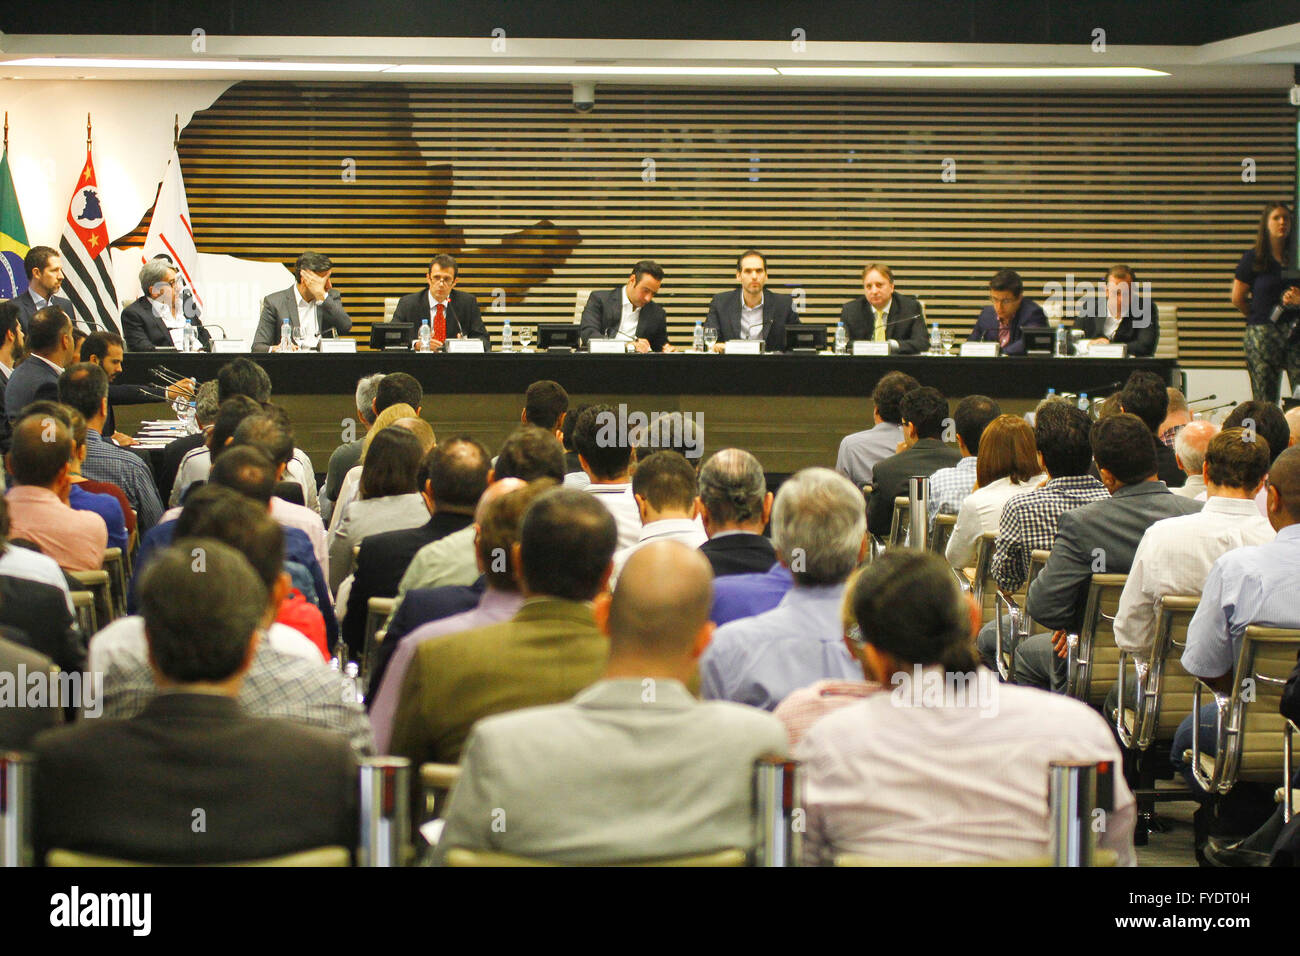 SAO PAULO, Brazil - 26/04/2016: CRIATEC DAY - The National Bank for Economic and Social Development (BNDES) supporting Criatec-Day - CAF / FIESP, participates in the meeting promoted by Criatec 2 Fund to promote and foster innovation and entrepreneurship . The meeting takes place on Tuesday (26), the Fiesp building on Avenida Paulista central region of S?o Paulo (Photo: Aloisio Mauricio / FotoArena) Stock Photo